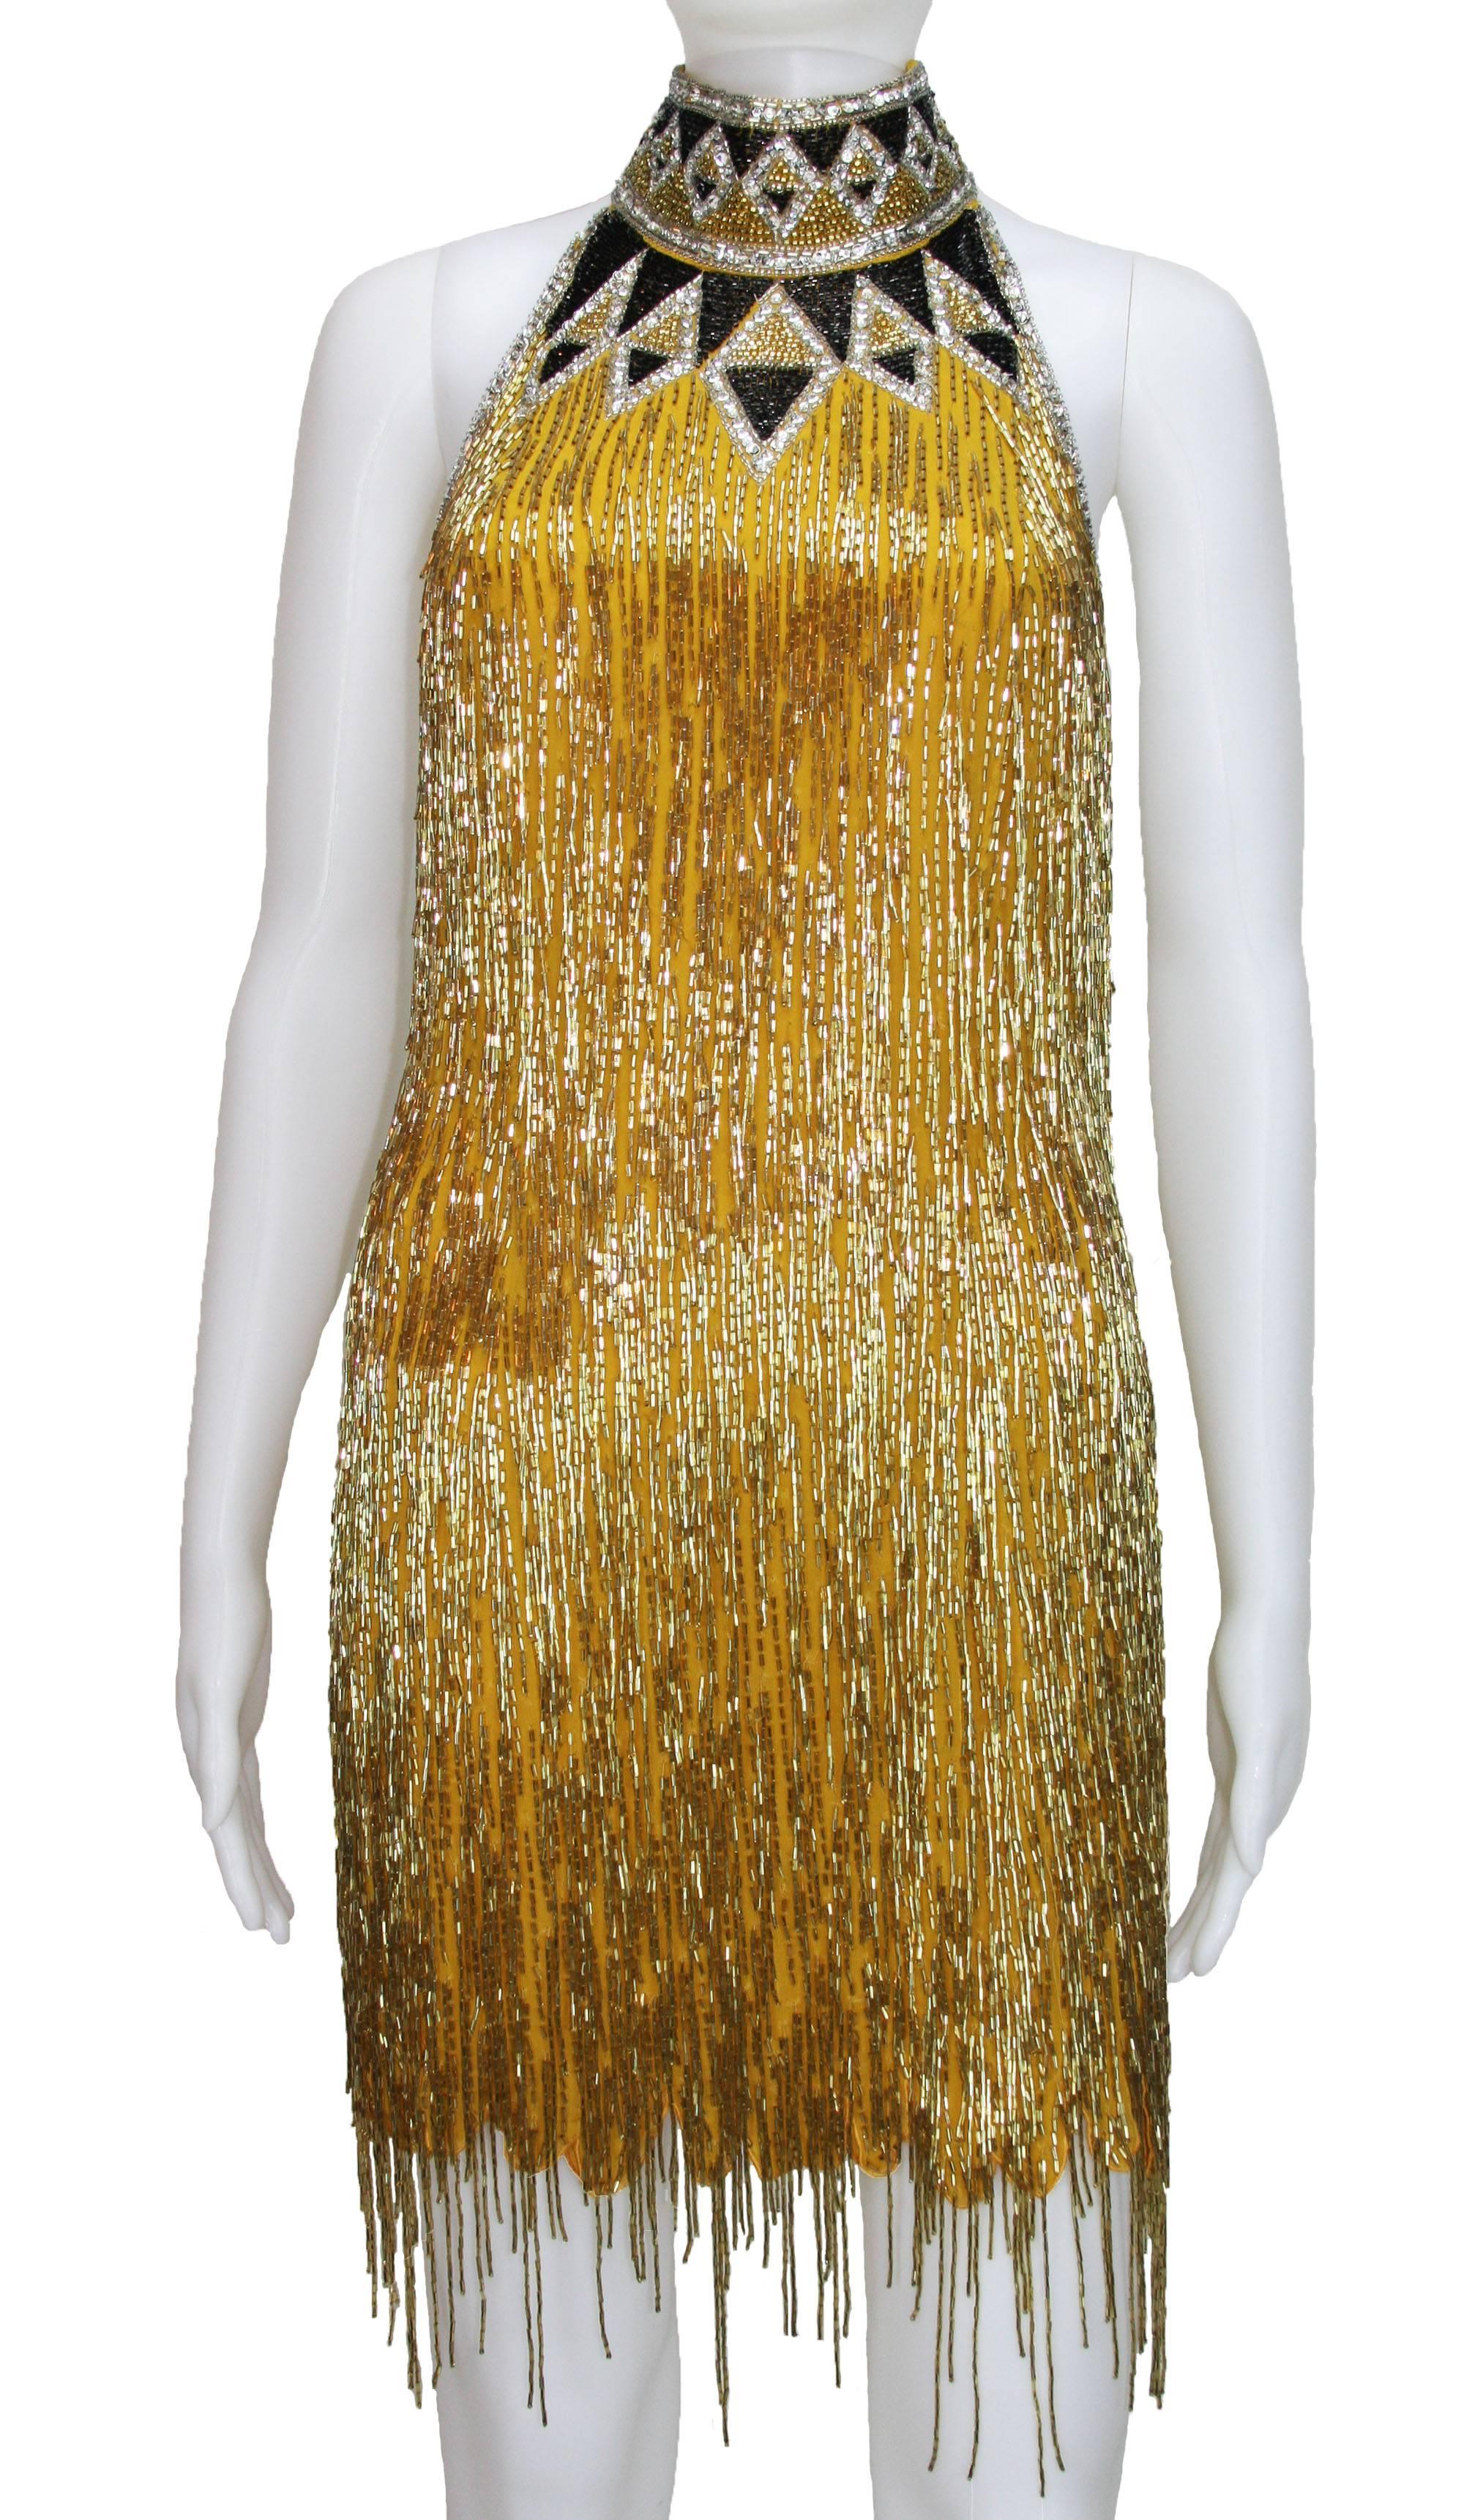 BOB MACKIE

BEADED COCKTAIL DRESS 

Mid 1980s, Embroidered with Bead work Shimmying Fringes 

Size 6

Length - 32